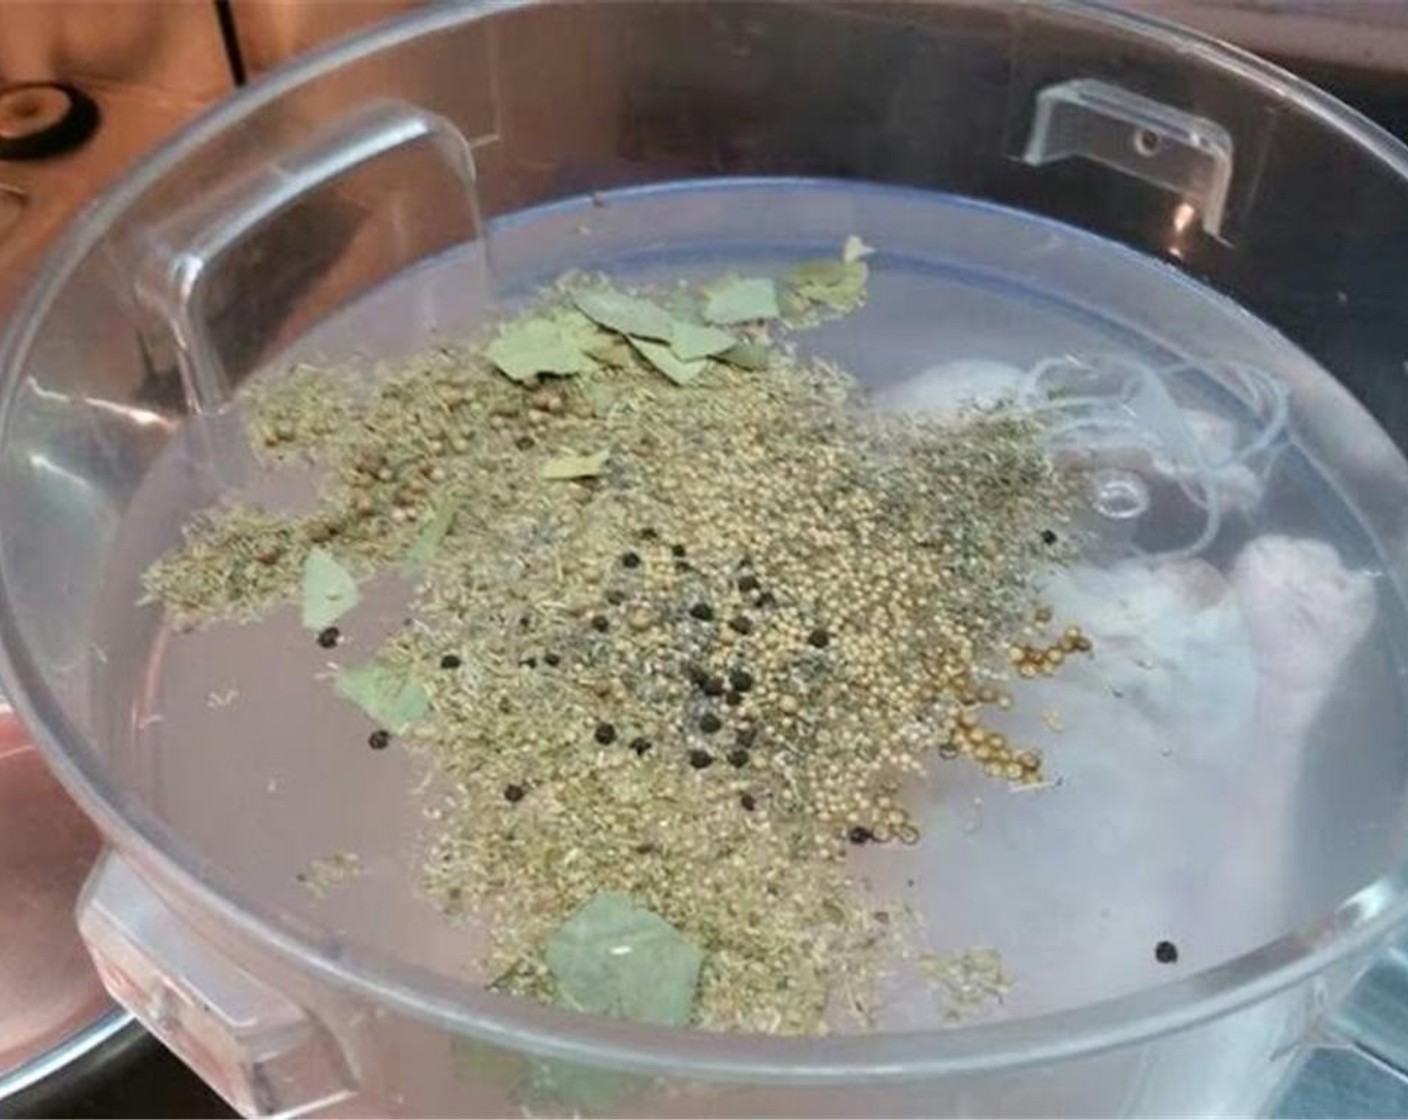 step 1 Begin by preparing the brine. Chop the Garlic (4 cloves). Fill a deep plastic container with Water (27 cups) and mix in Sea Salt (3/4 cup), Whole Coriander Seeds (1 Tbsp), Black Peppercorns (1 Tbsp), Mustard Seeds (1 Tbsp), Fresh Thyme (1 Tbsp), Fresh Rosemary (1 Tbsp), Fresh Sage (1 Tbsp), garlic and Bay Leaves (6) until the salt dissolves.